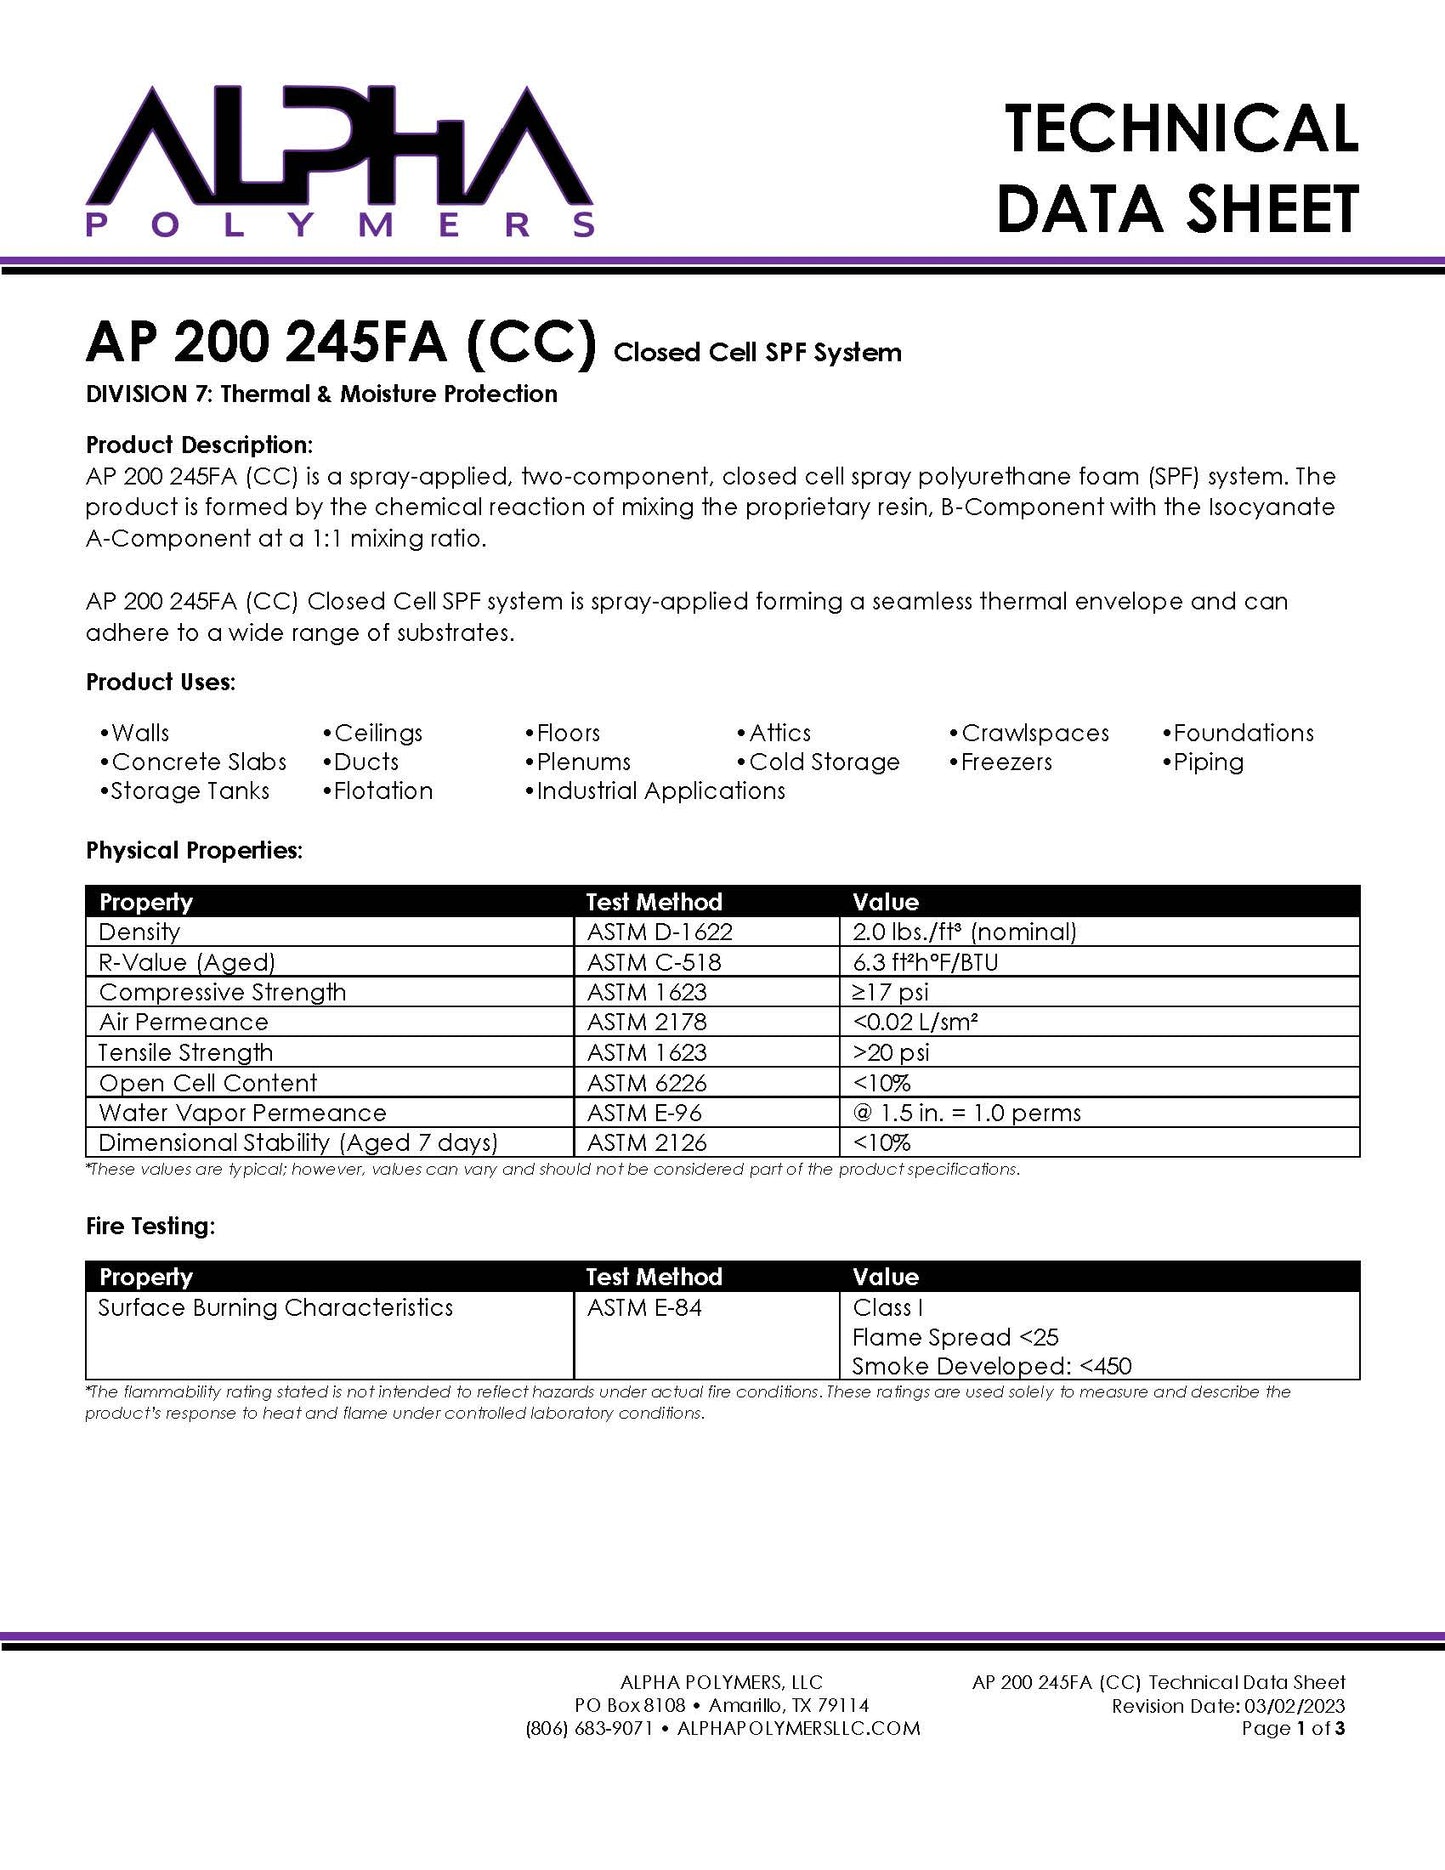 Closed Cell Spray Foam Resin AP 200 245FA (CC) Call for Pricing